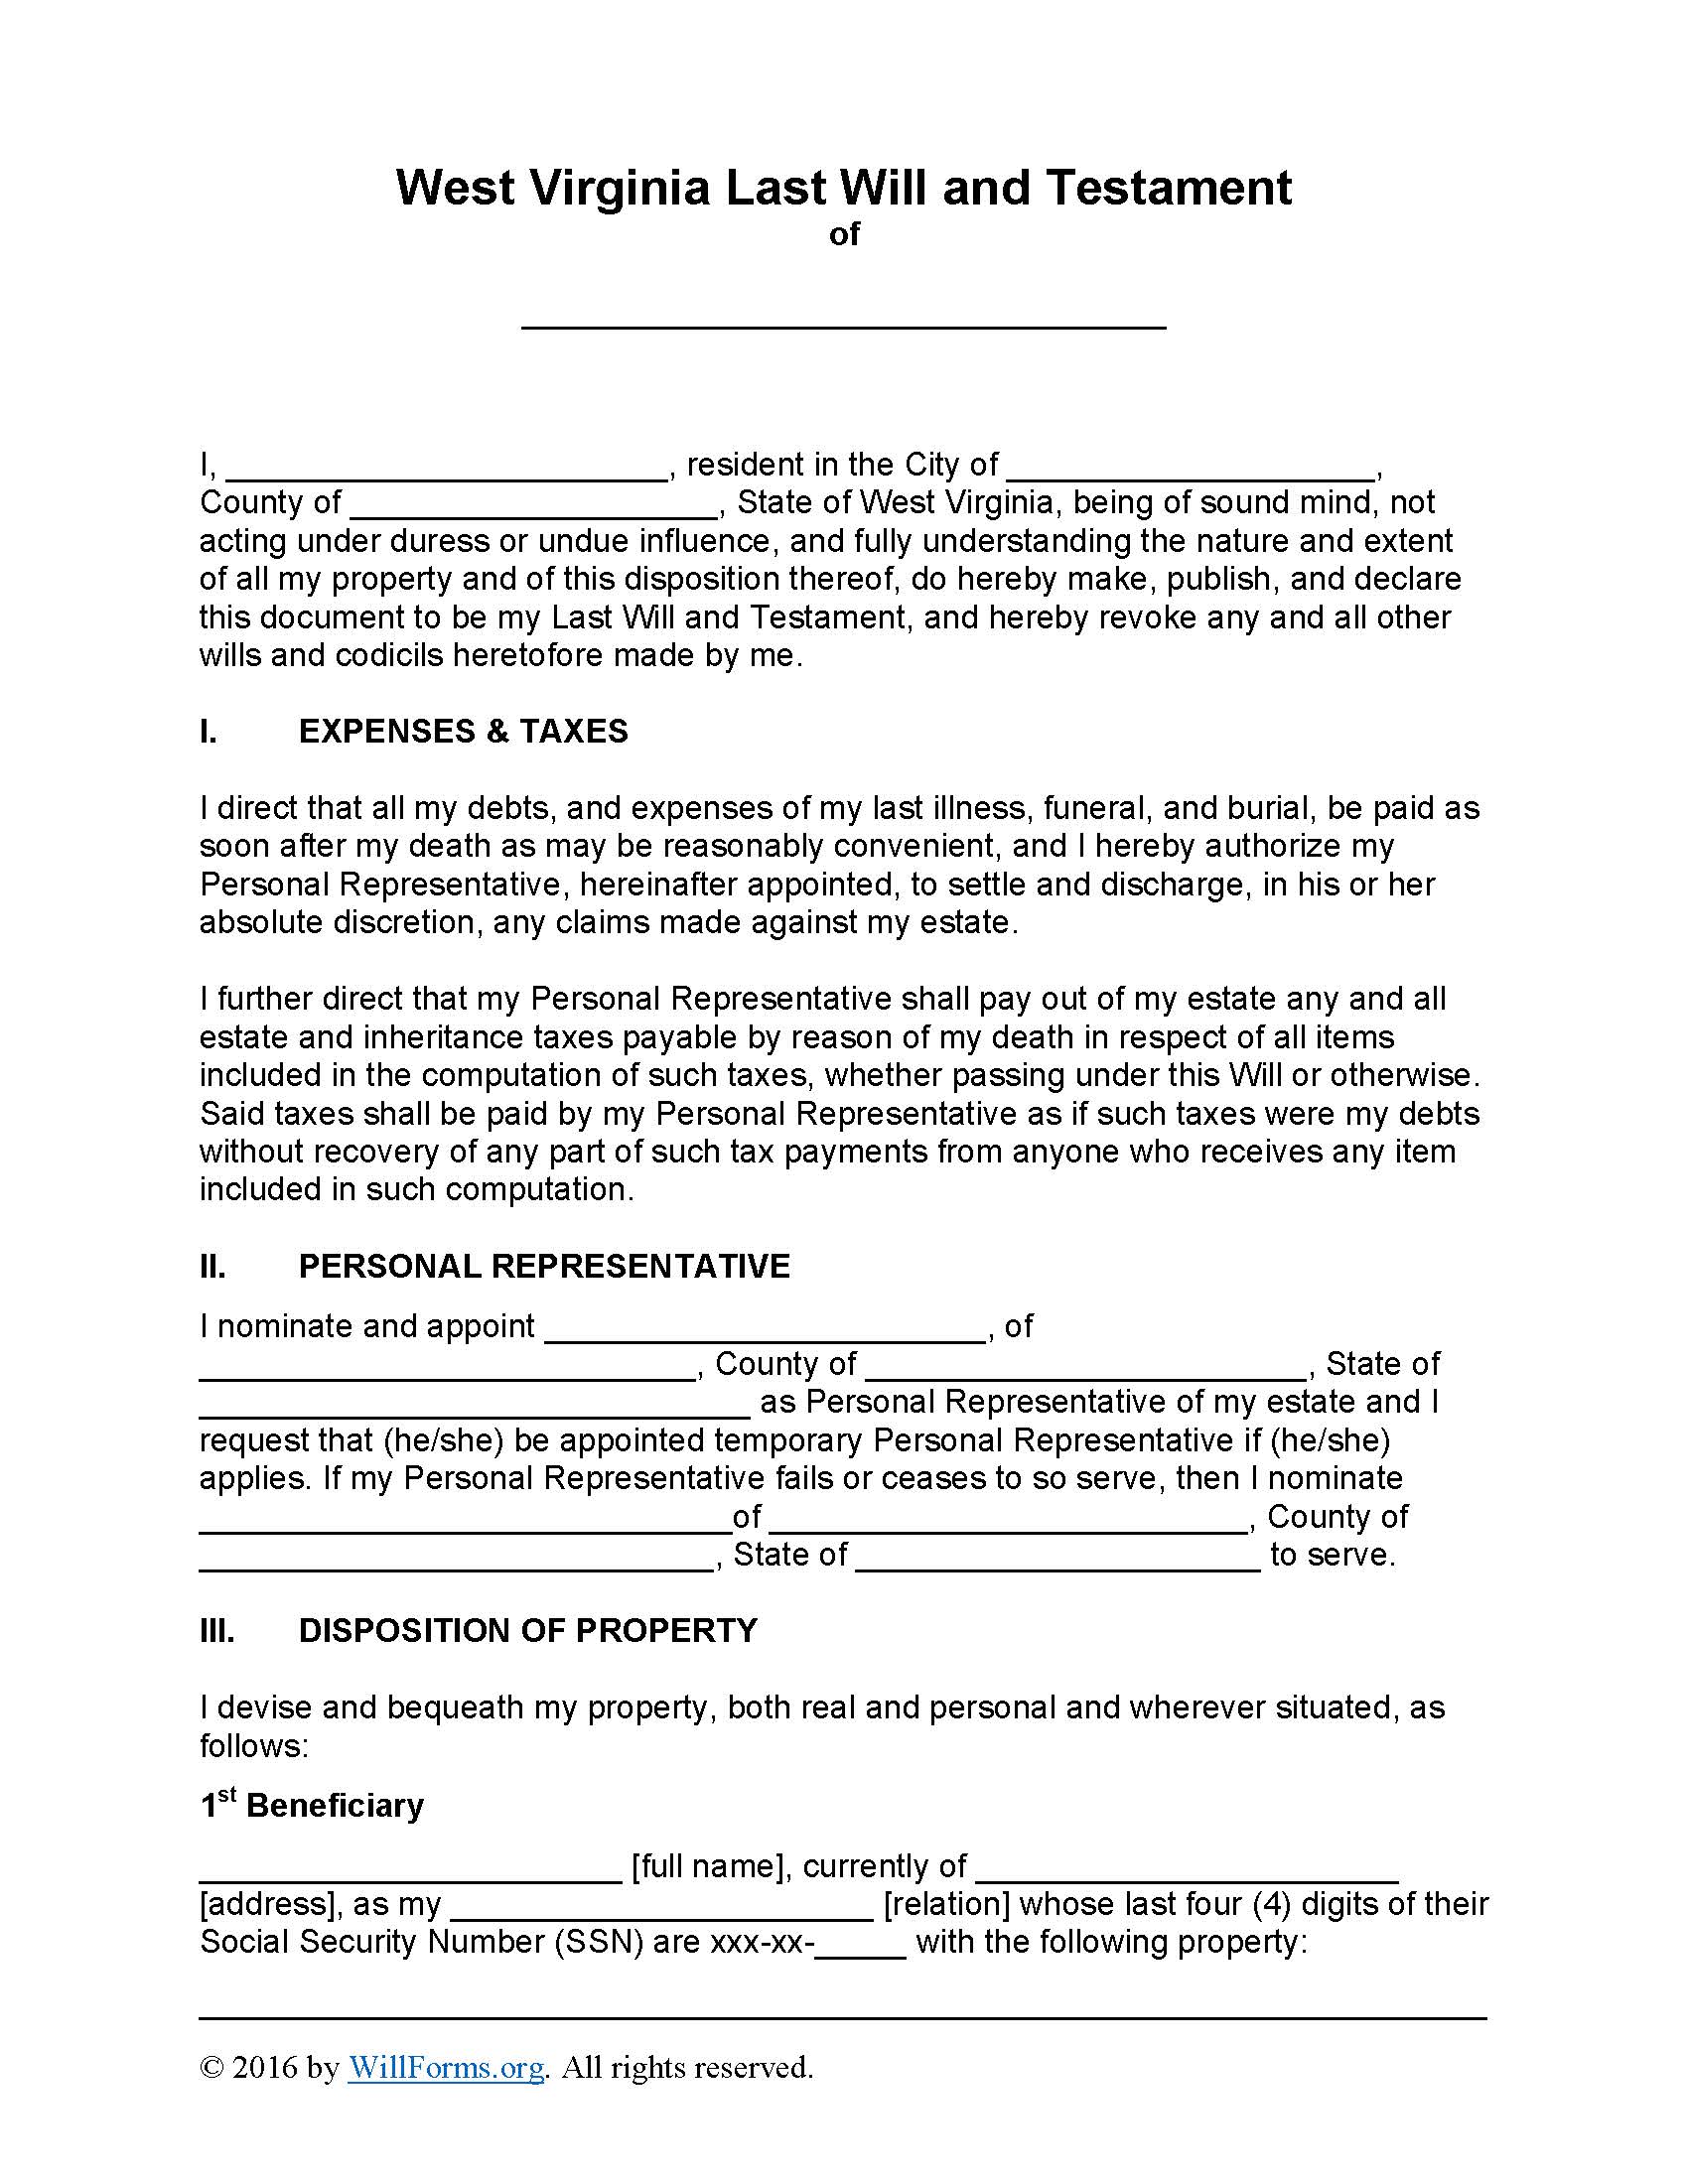 West Virginia Last Will and Testament Form